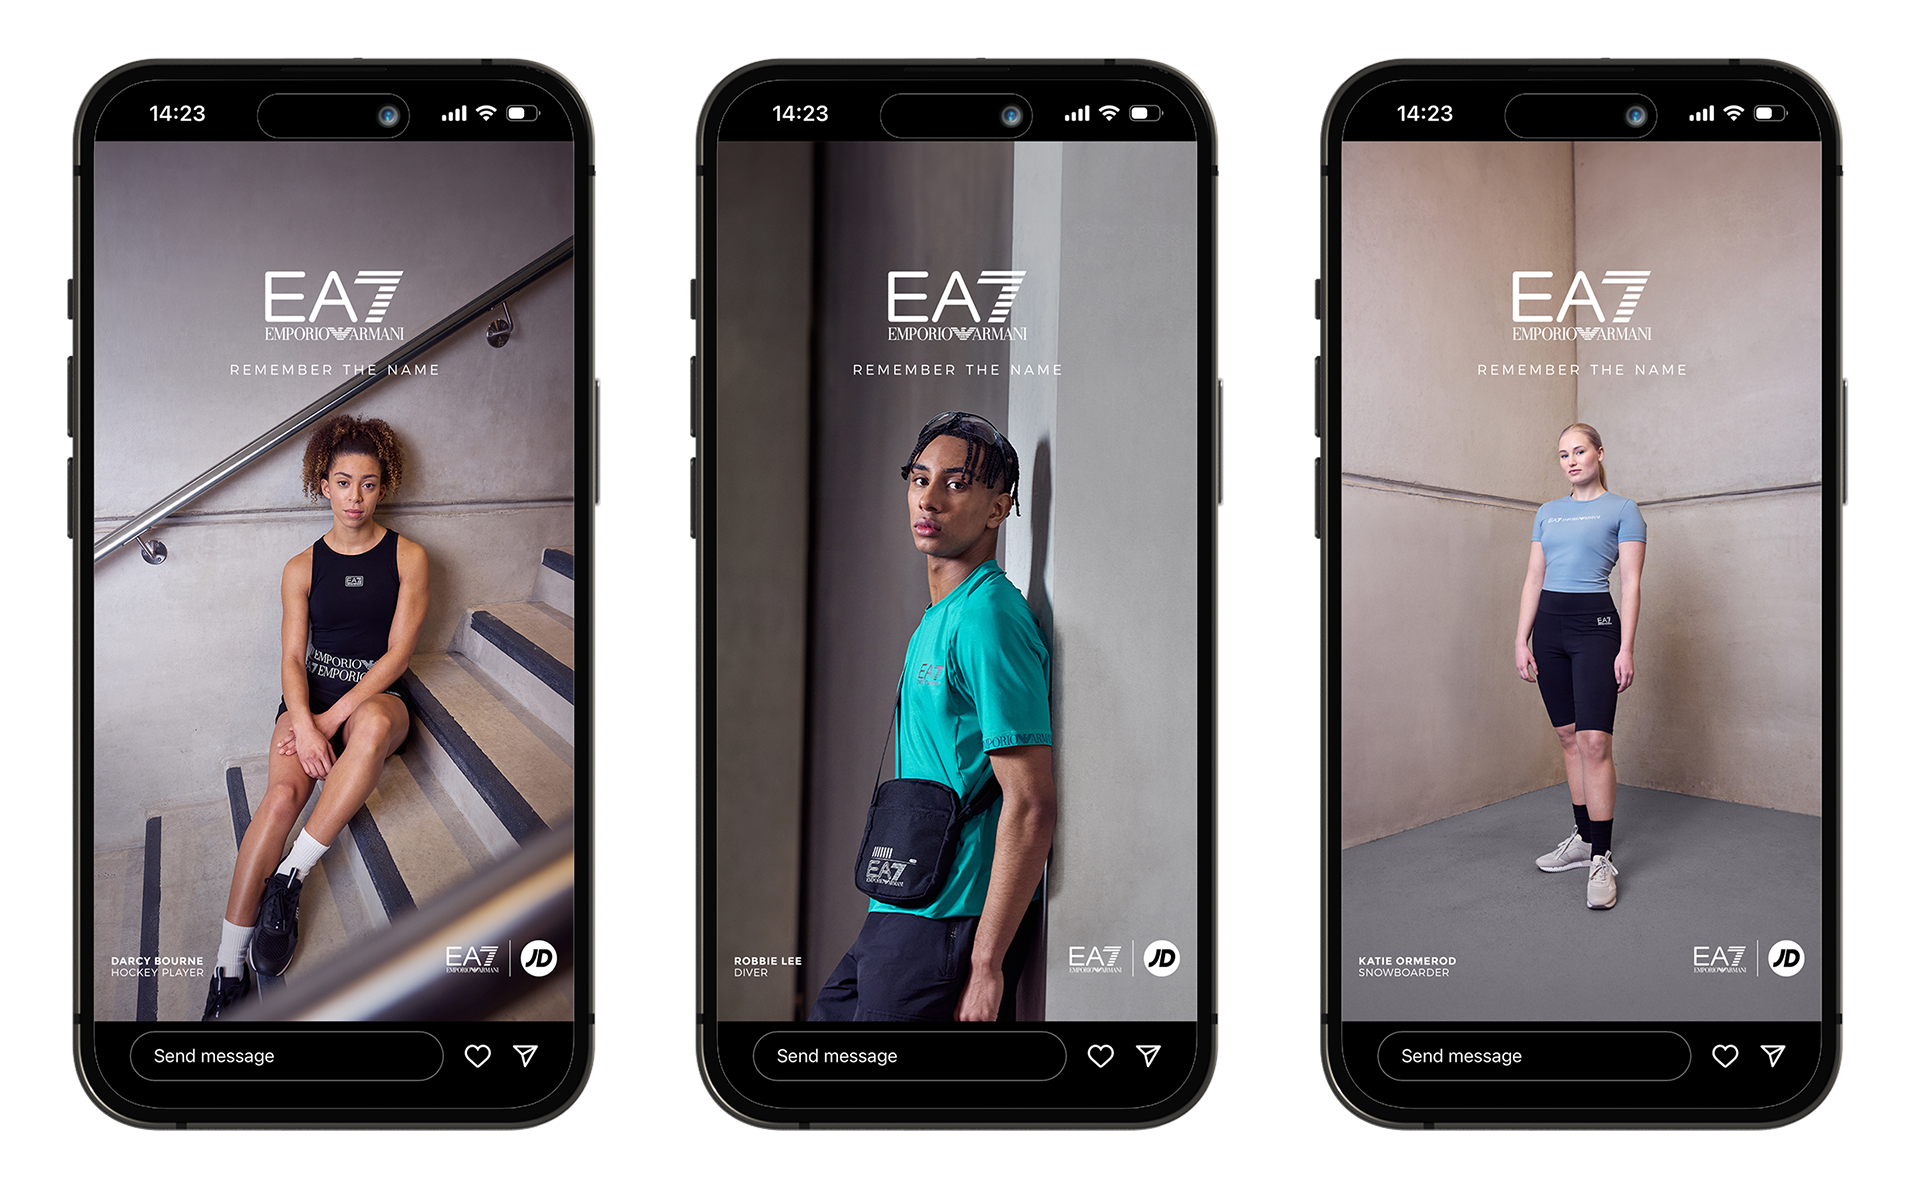 3 iPhones displaying 3 Instagram stories. One features a young female model wearing EA7 activewear, the second features a young male athlete wearing EA7 activewear, and the third features another young female model wearing EA7 activewear. All 3 also feature the EA7 logo and the headline REMEMBER THE NAME